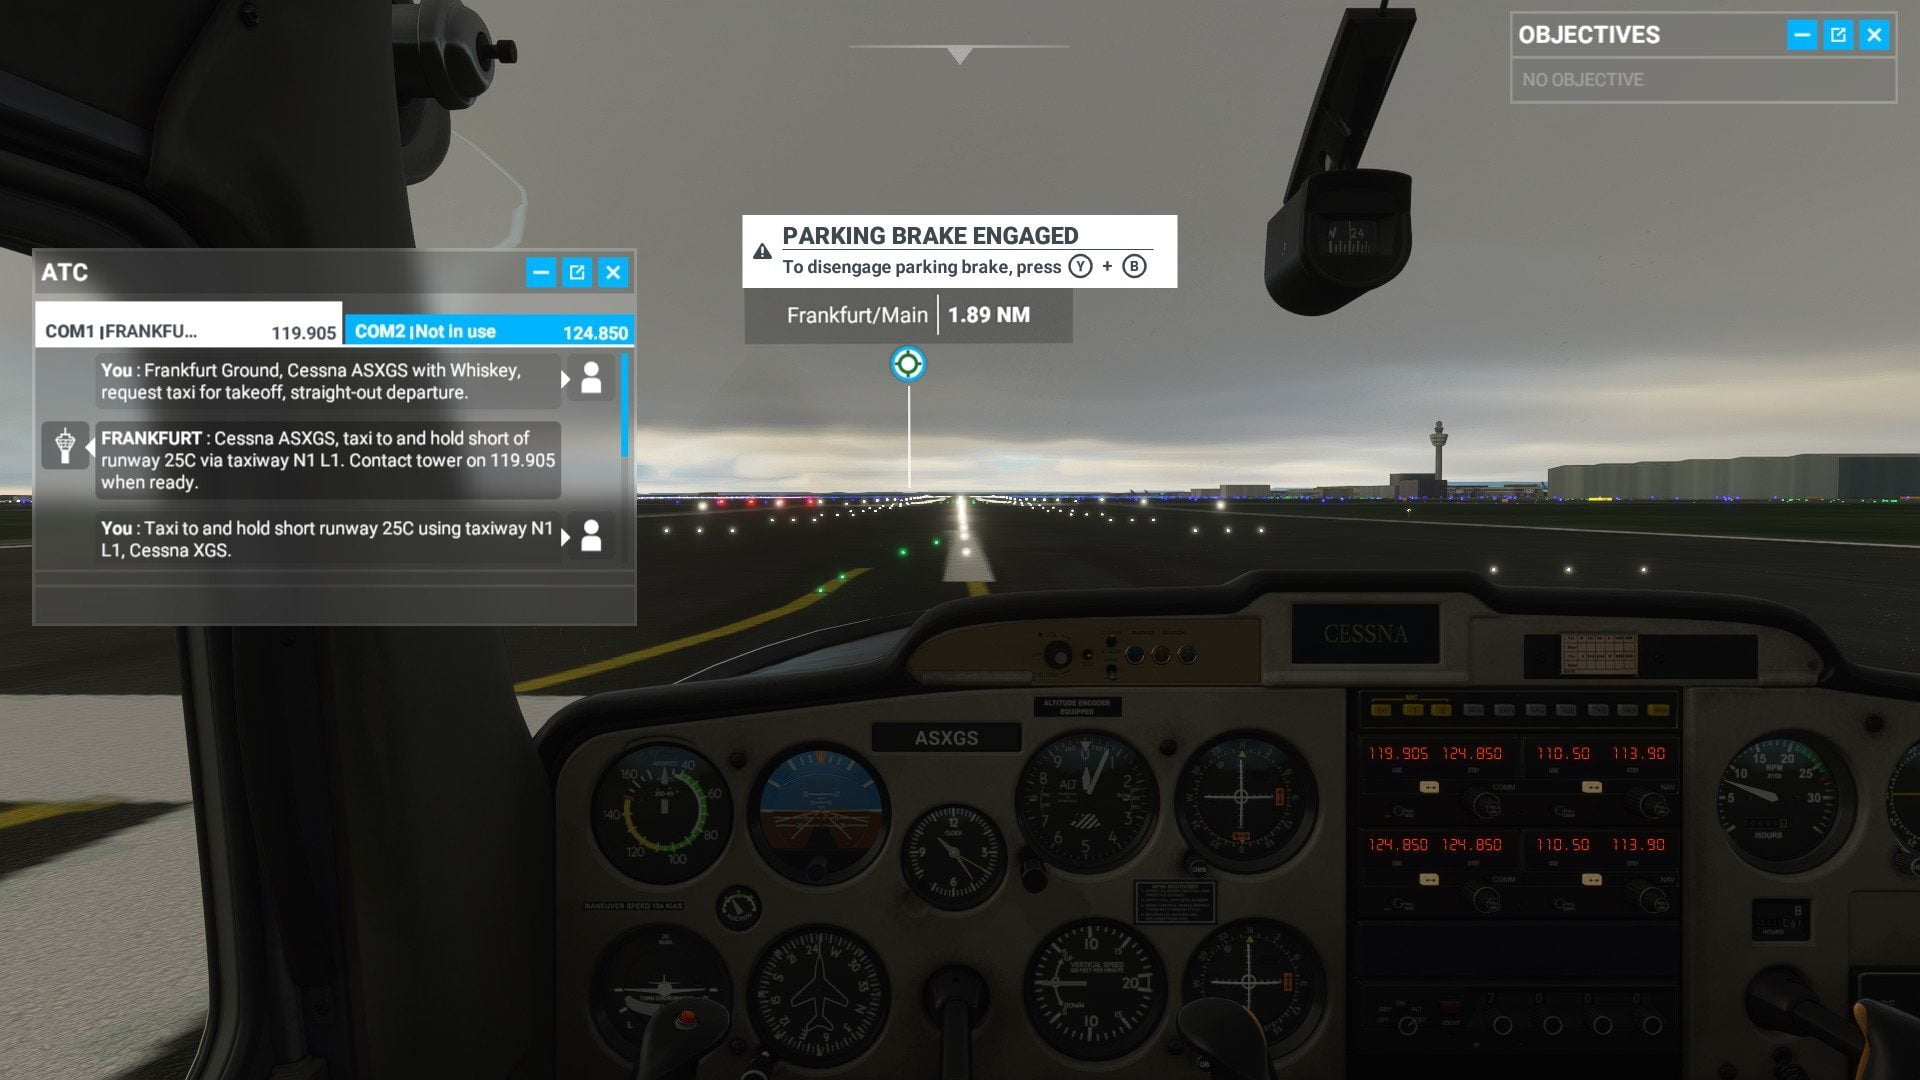 Dialogue with air traffic control in a dialog box in Flight Simulator 2020